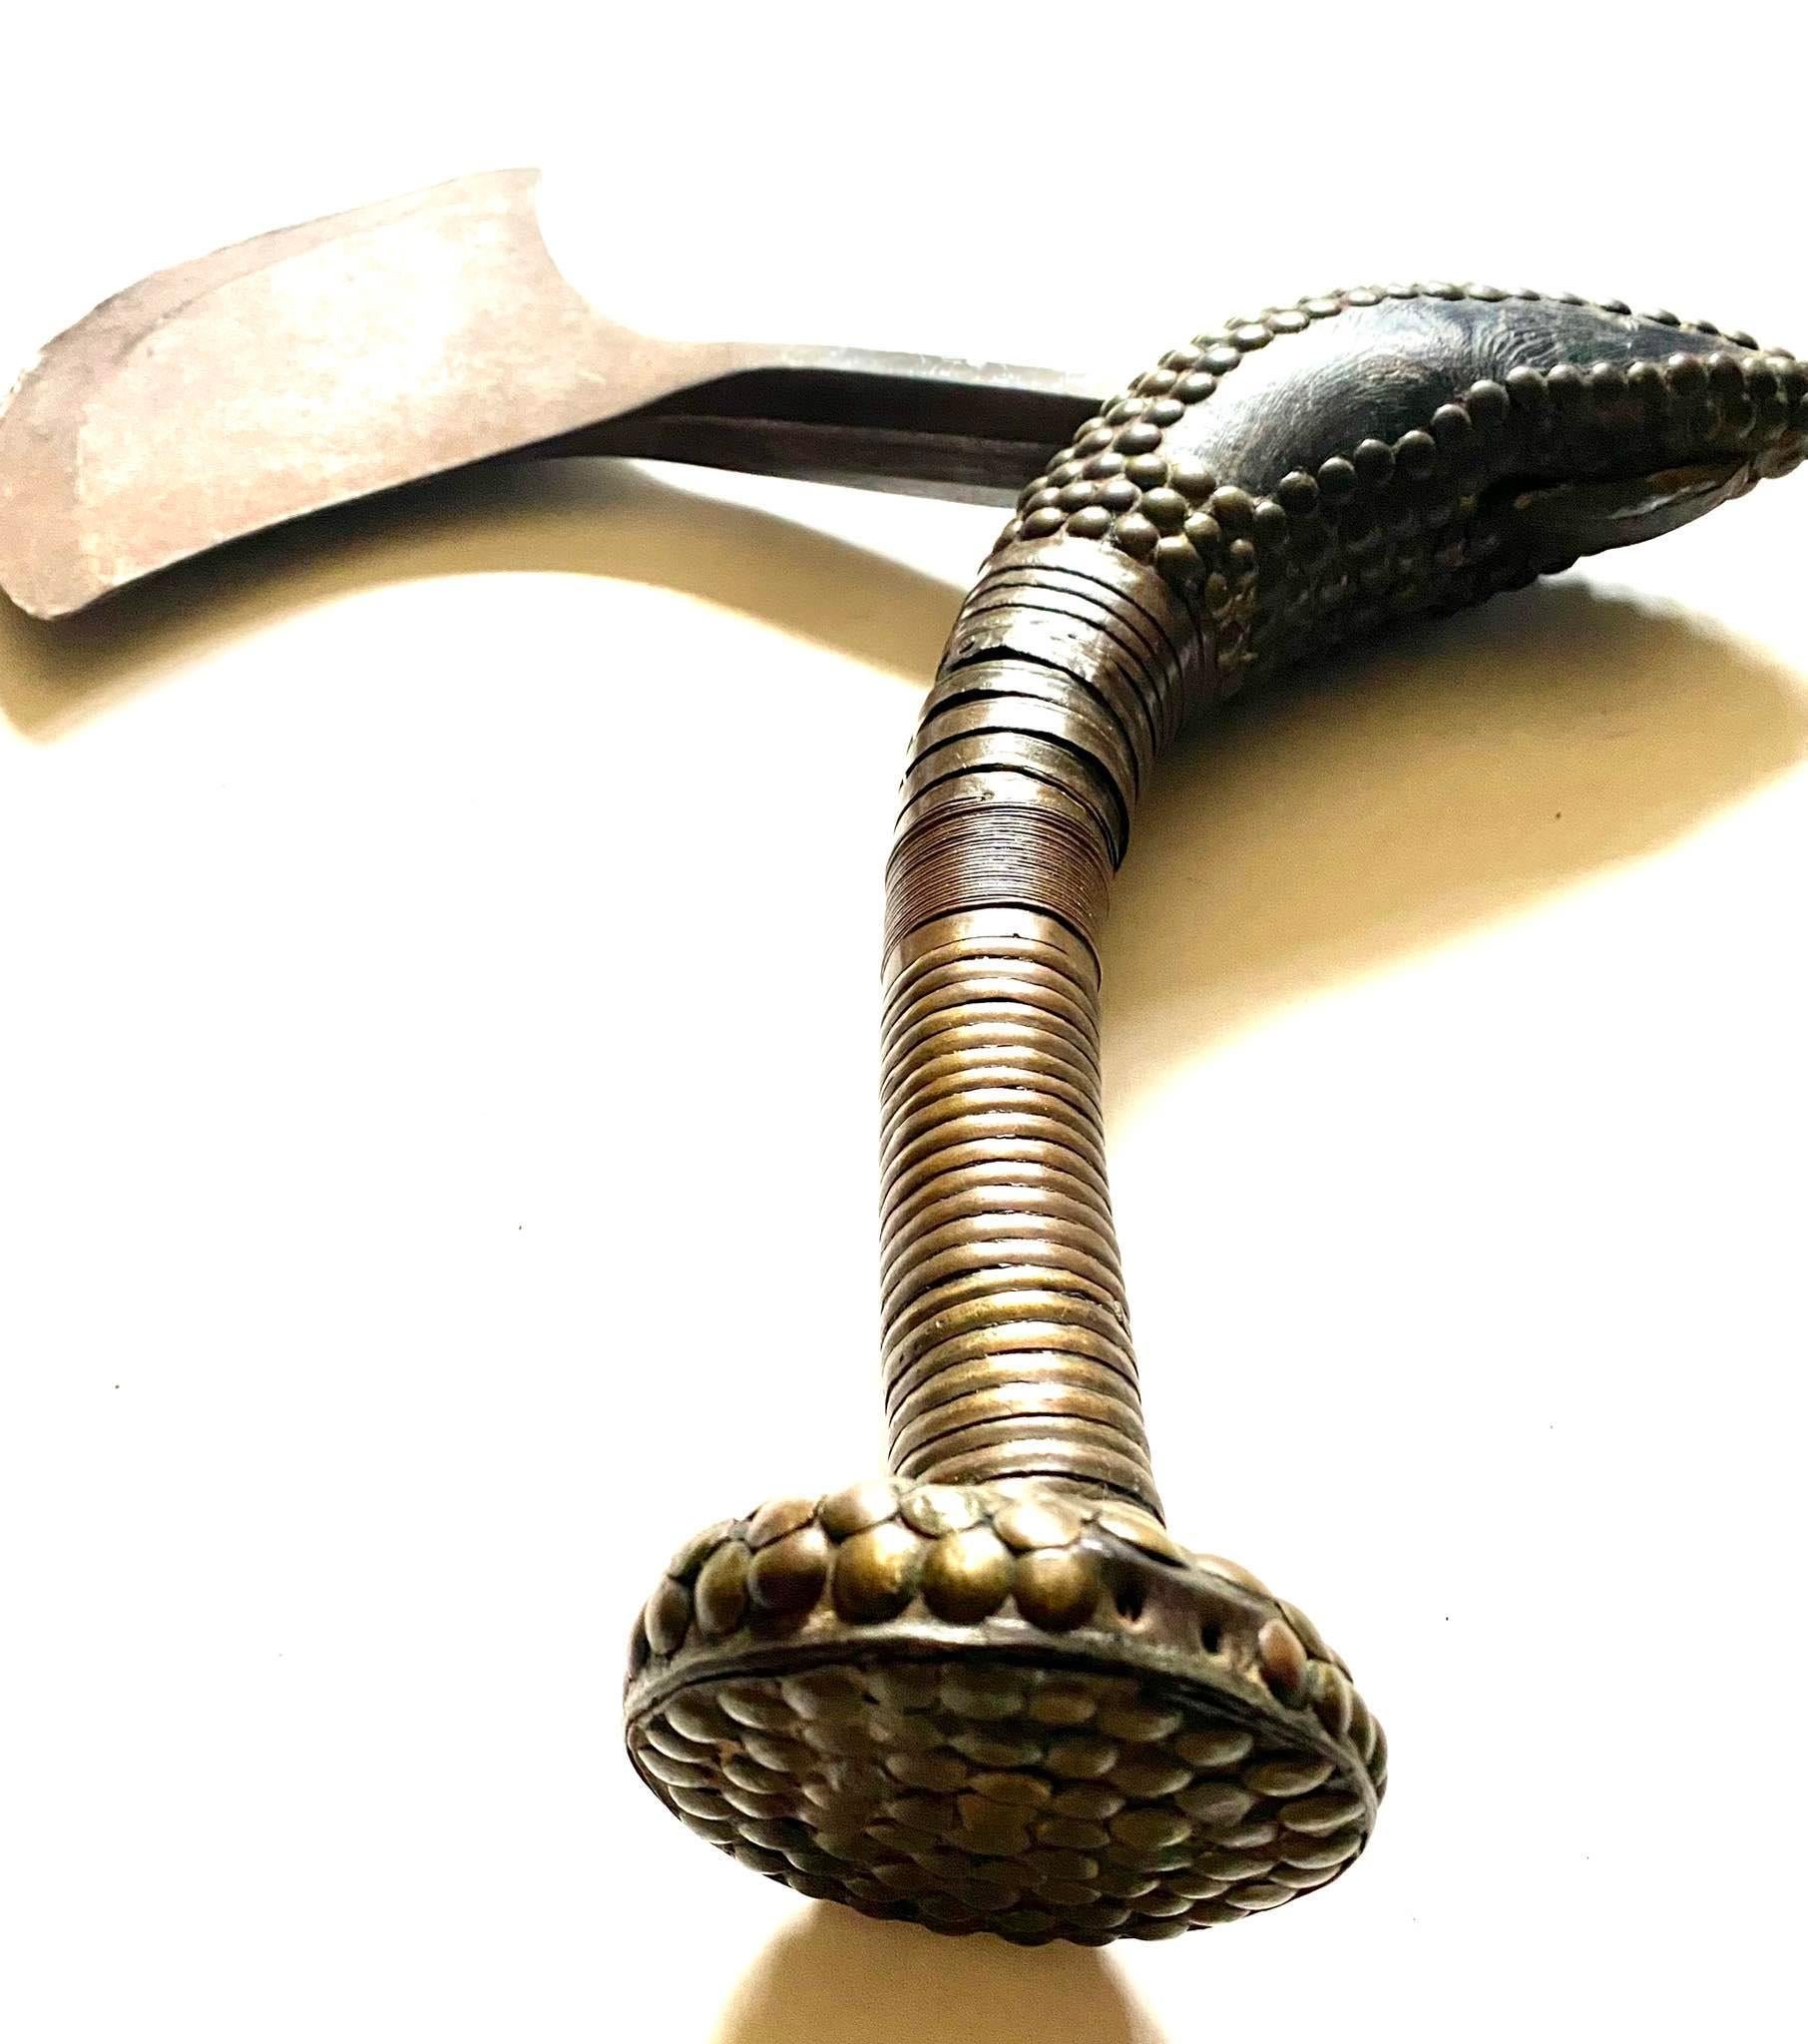 An exceptional and very rare prestige ibia axe DR Congo/Brazzaville of the Teke /Mfinu and Laali people.
Axes like these type belonged to the Teke chiefs / Kings
A museum quality and extremely rare piece!!!
Period: Around 1800-19th century.
In